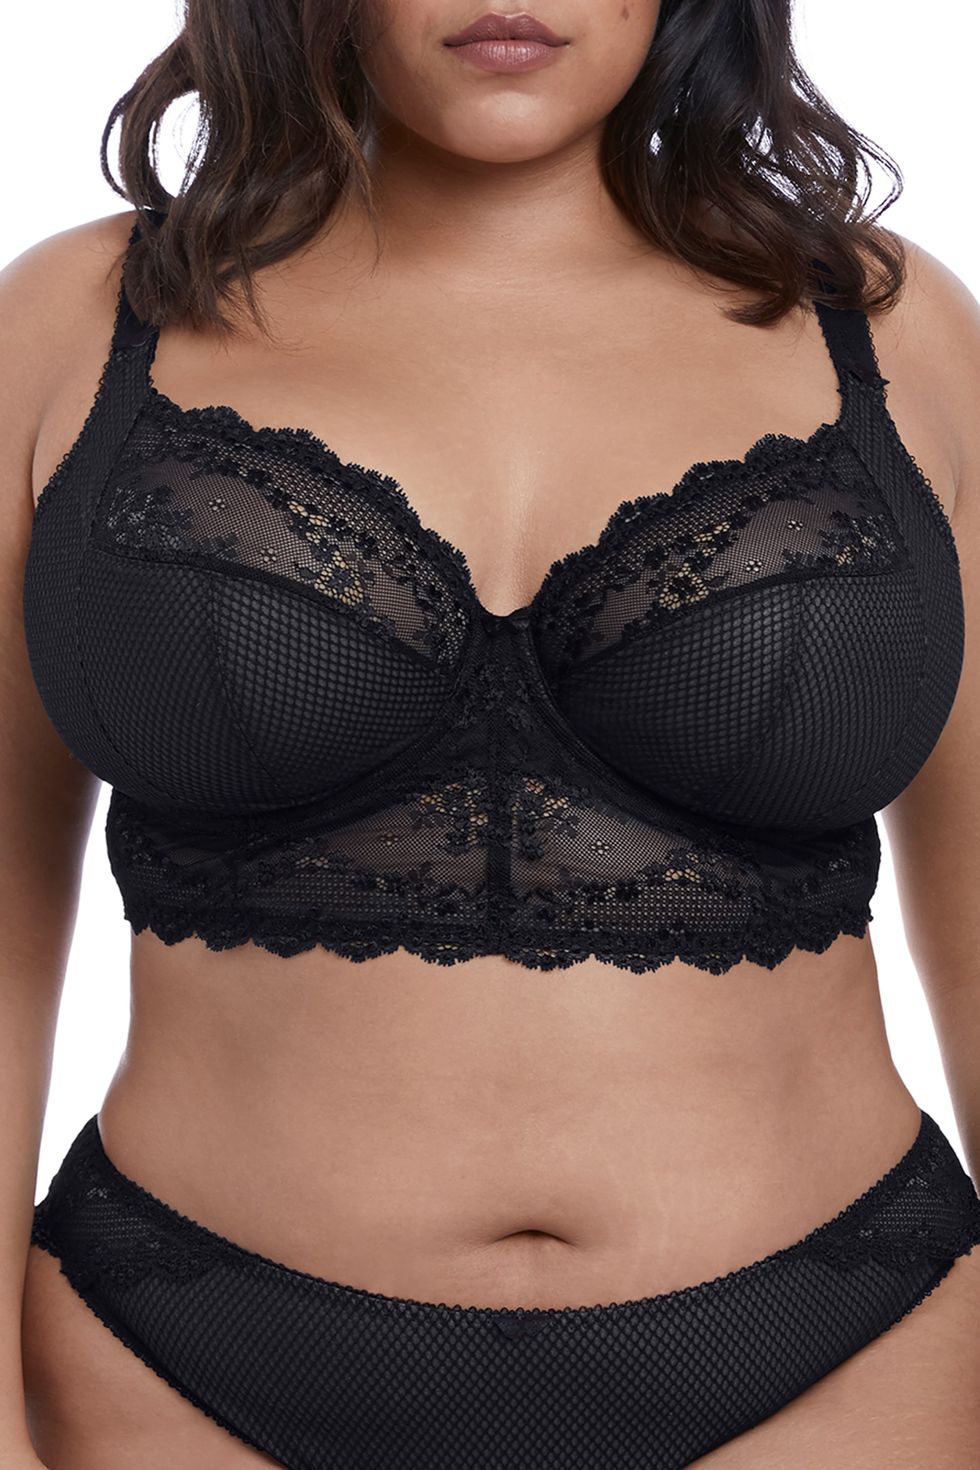 Essential lingerie item for women with larger busts – SSHK Shop by